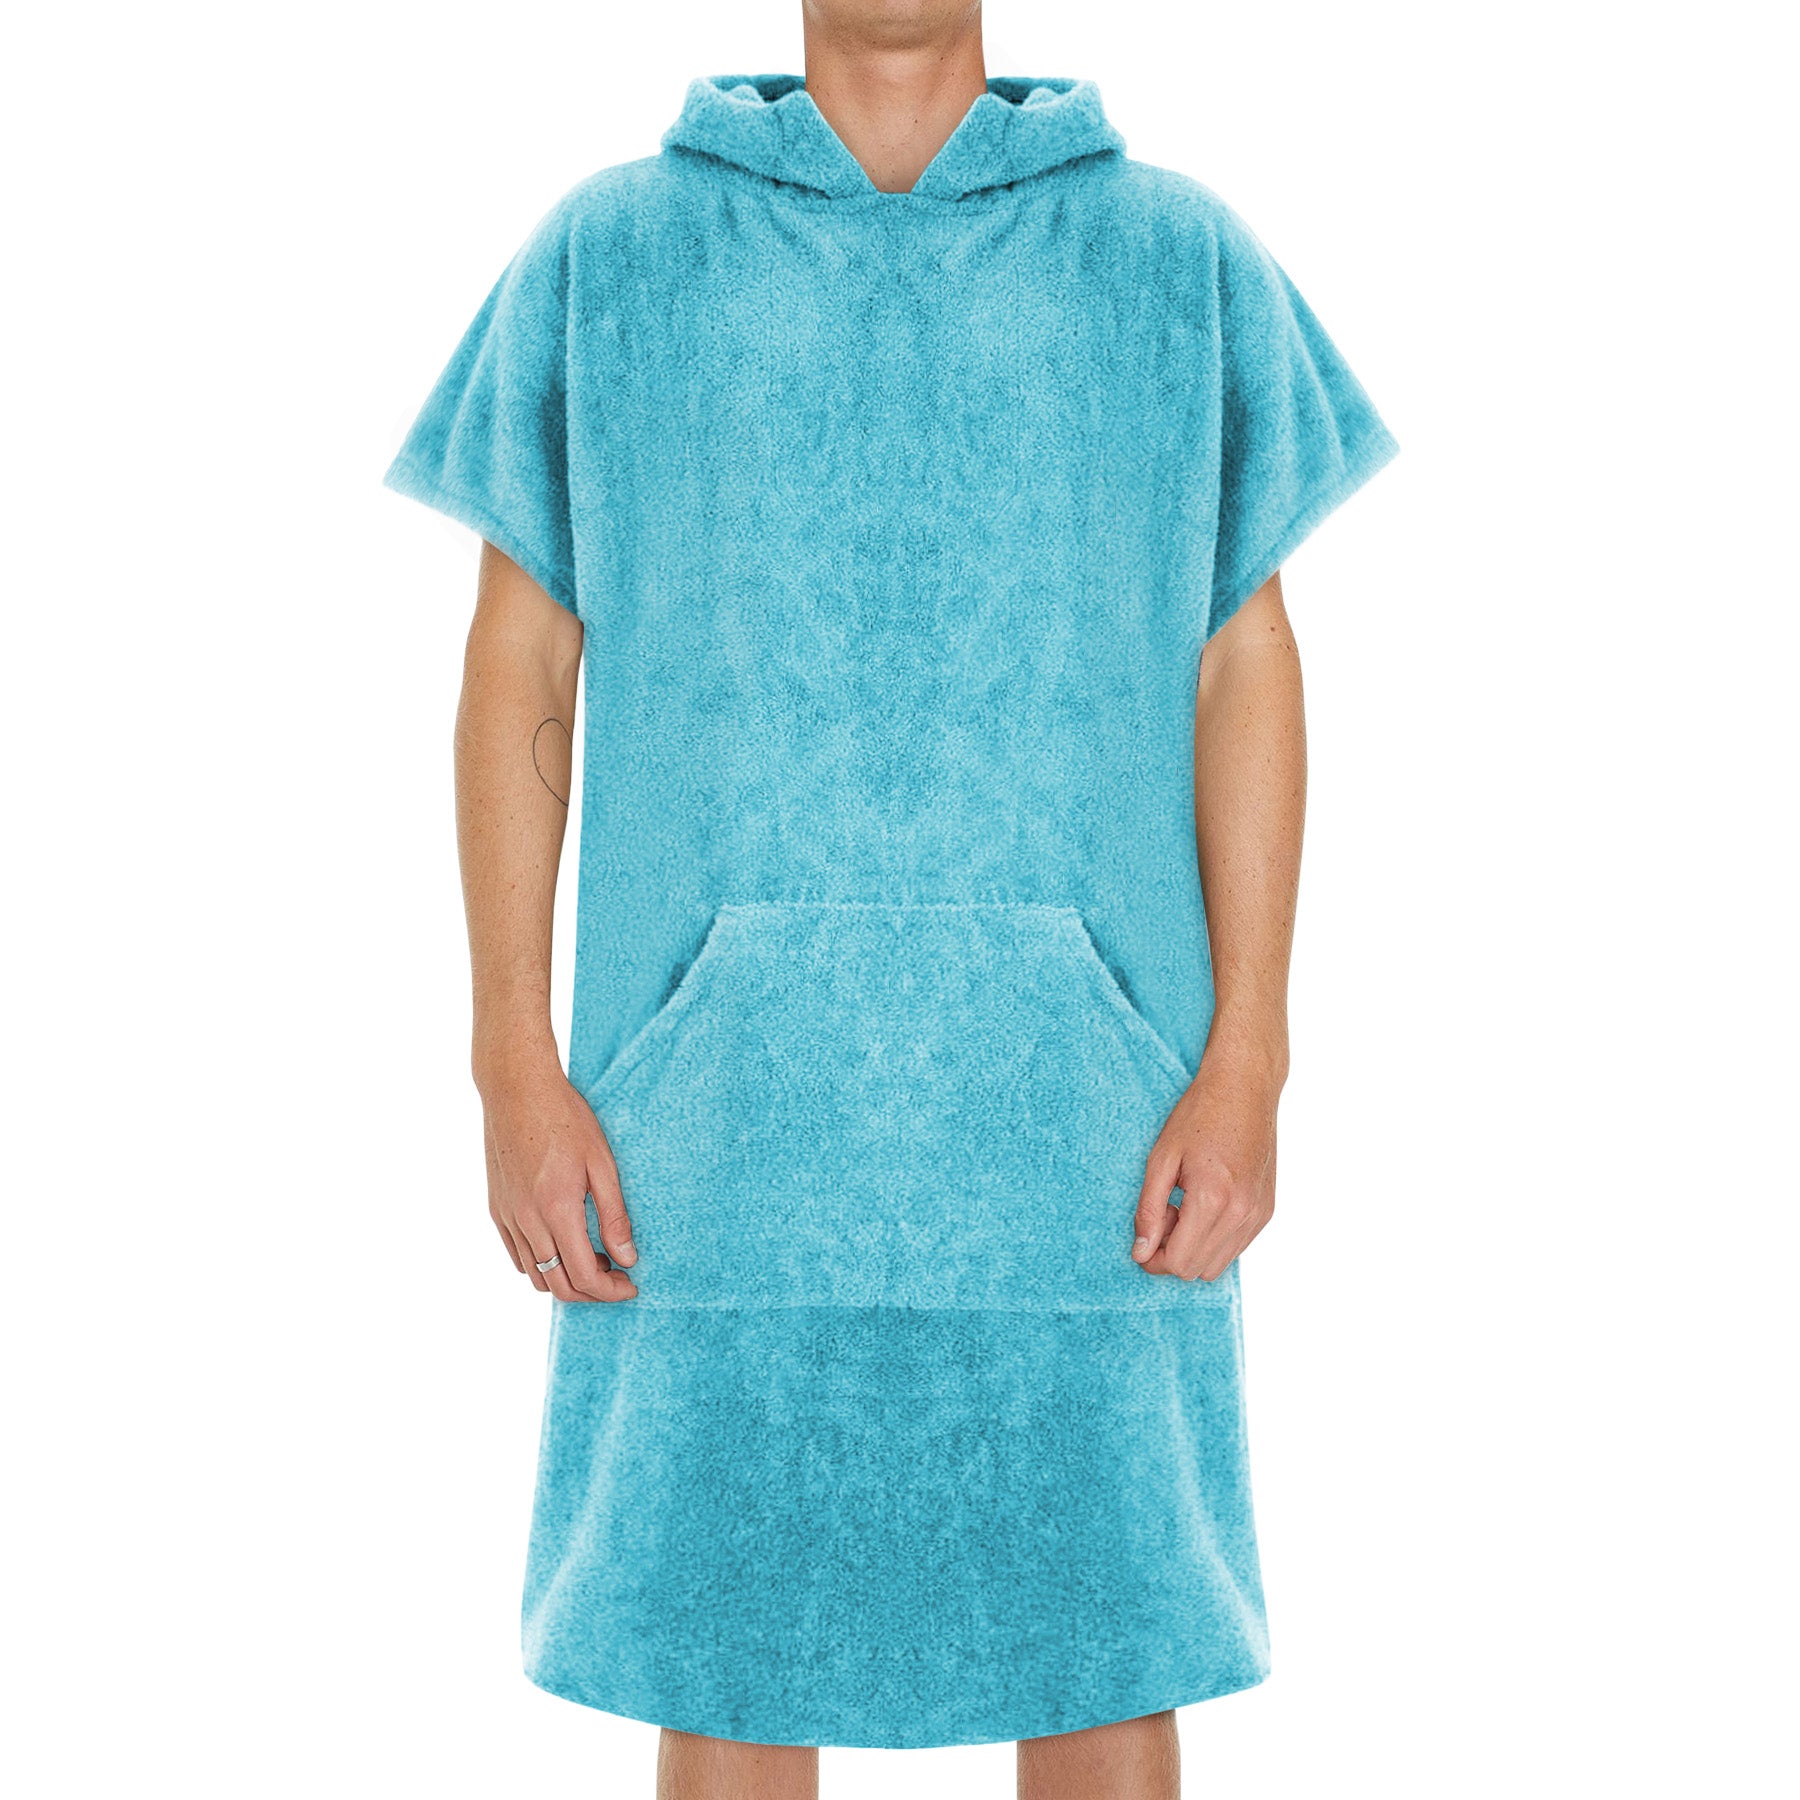 COTTON BEACH PONCHO TOWEL WITH POCKETS-Beach Towels-Weave Essentials-TURQUOISE-Weave Essentials